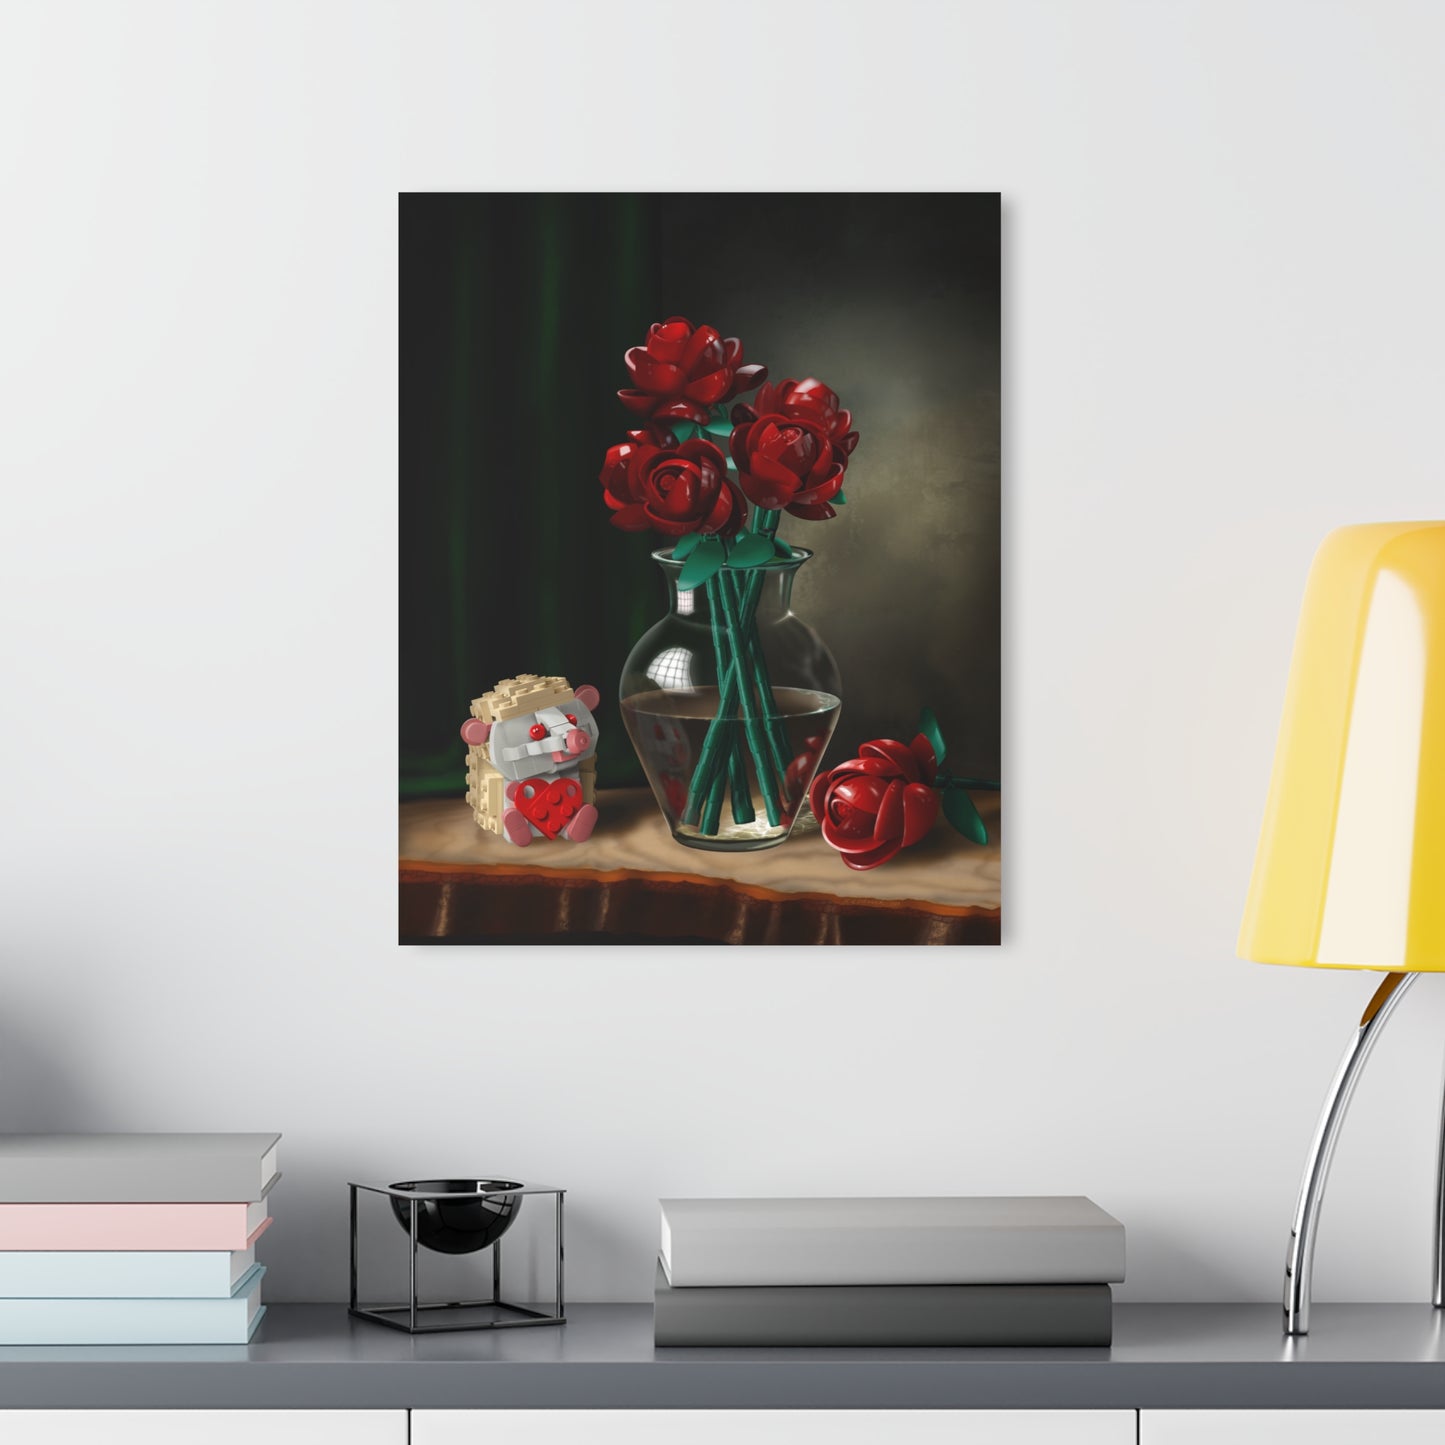 Ted's in Love - Acrylic Print